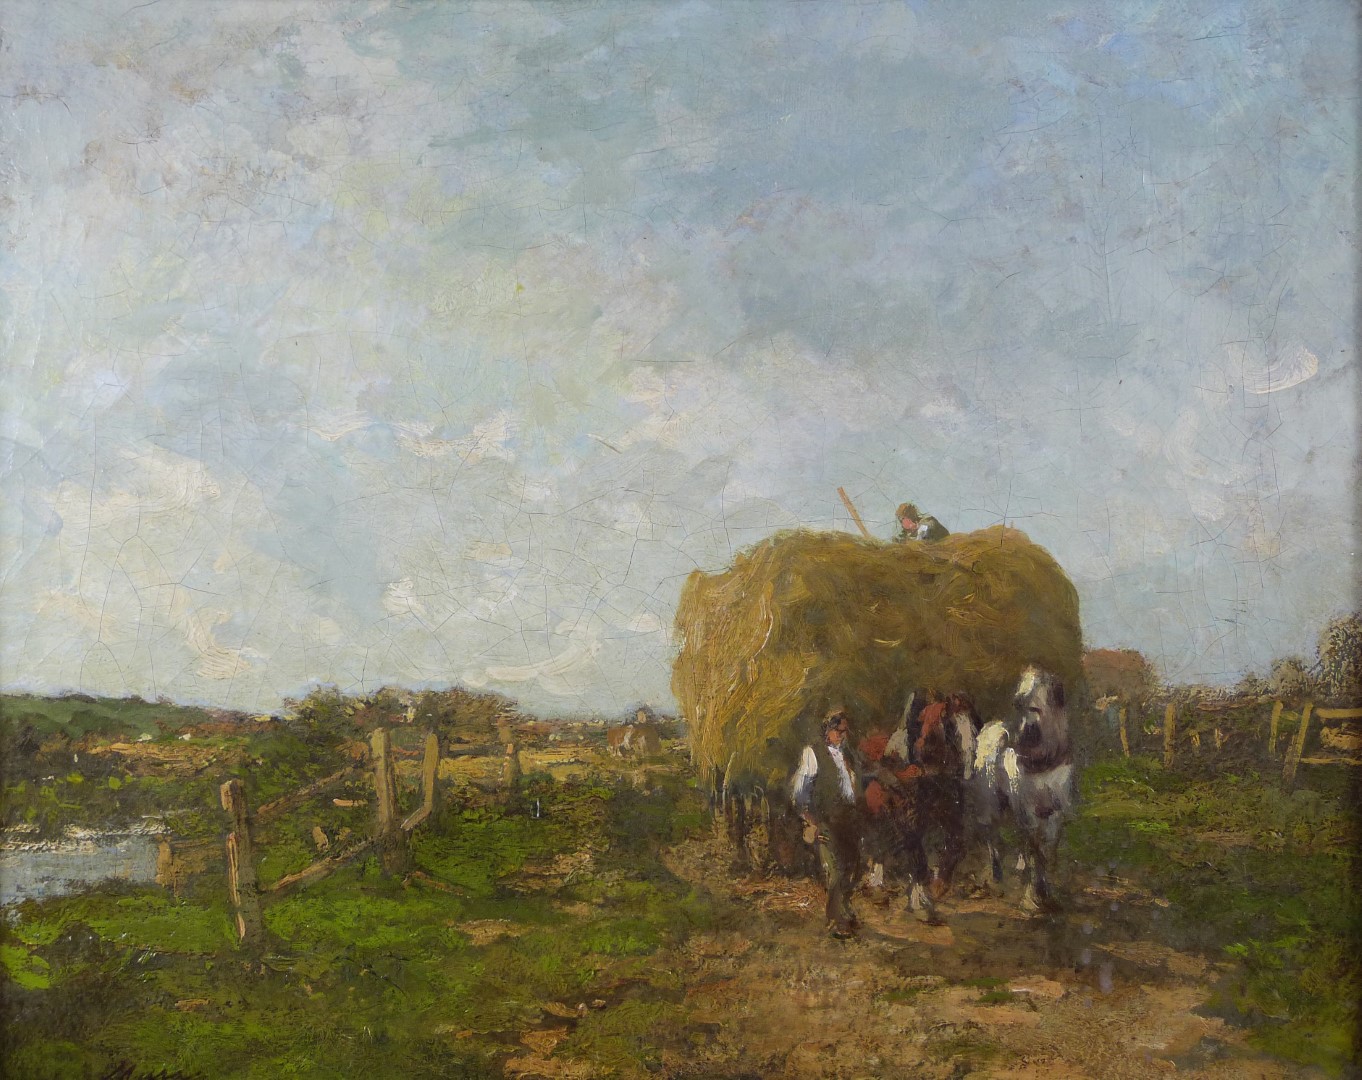 Muray impressionist oil on canvas hay cart being pulled beyond a pond, indistinctly signed lower